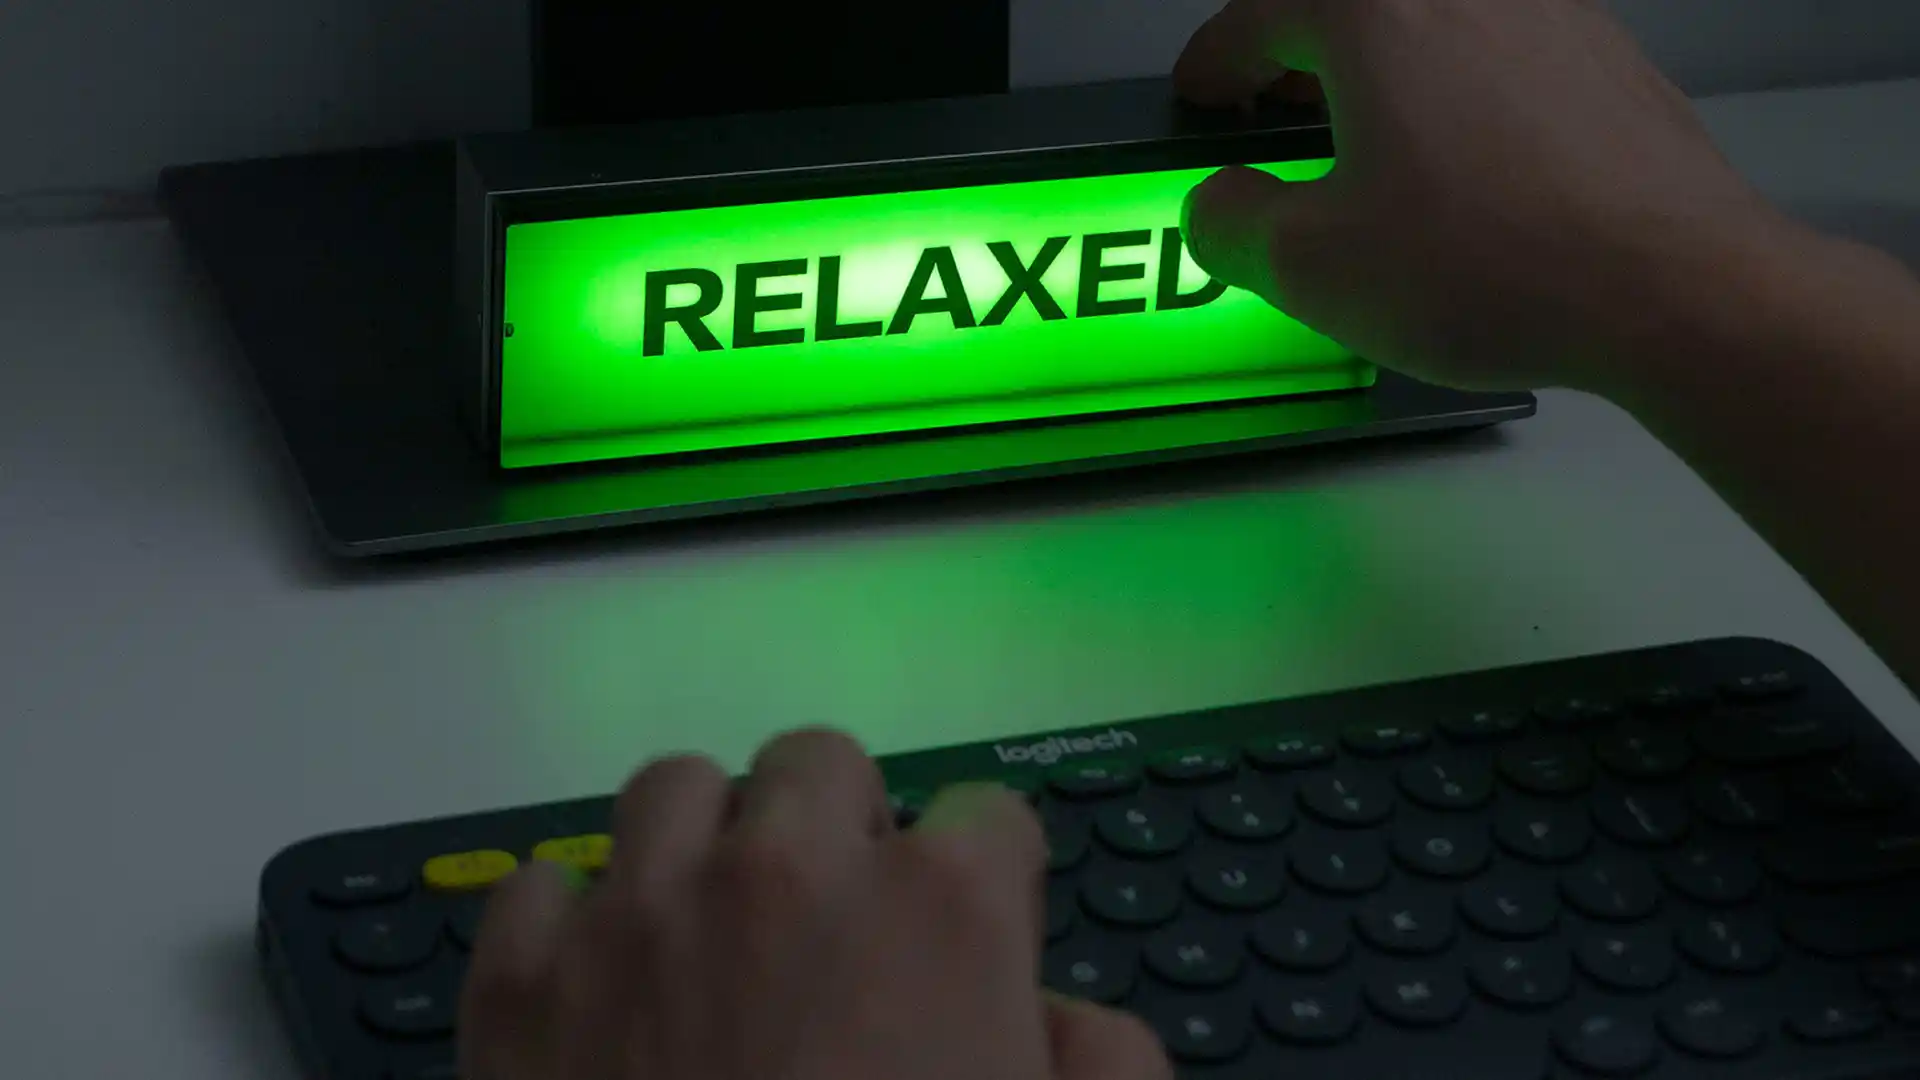 A close-up view of a keyboard and a lit-up green sign reading "RELAXED" with a hand reaching out.